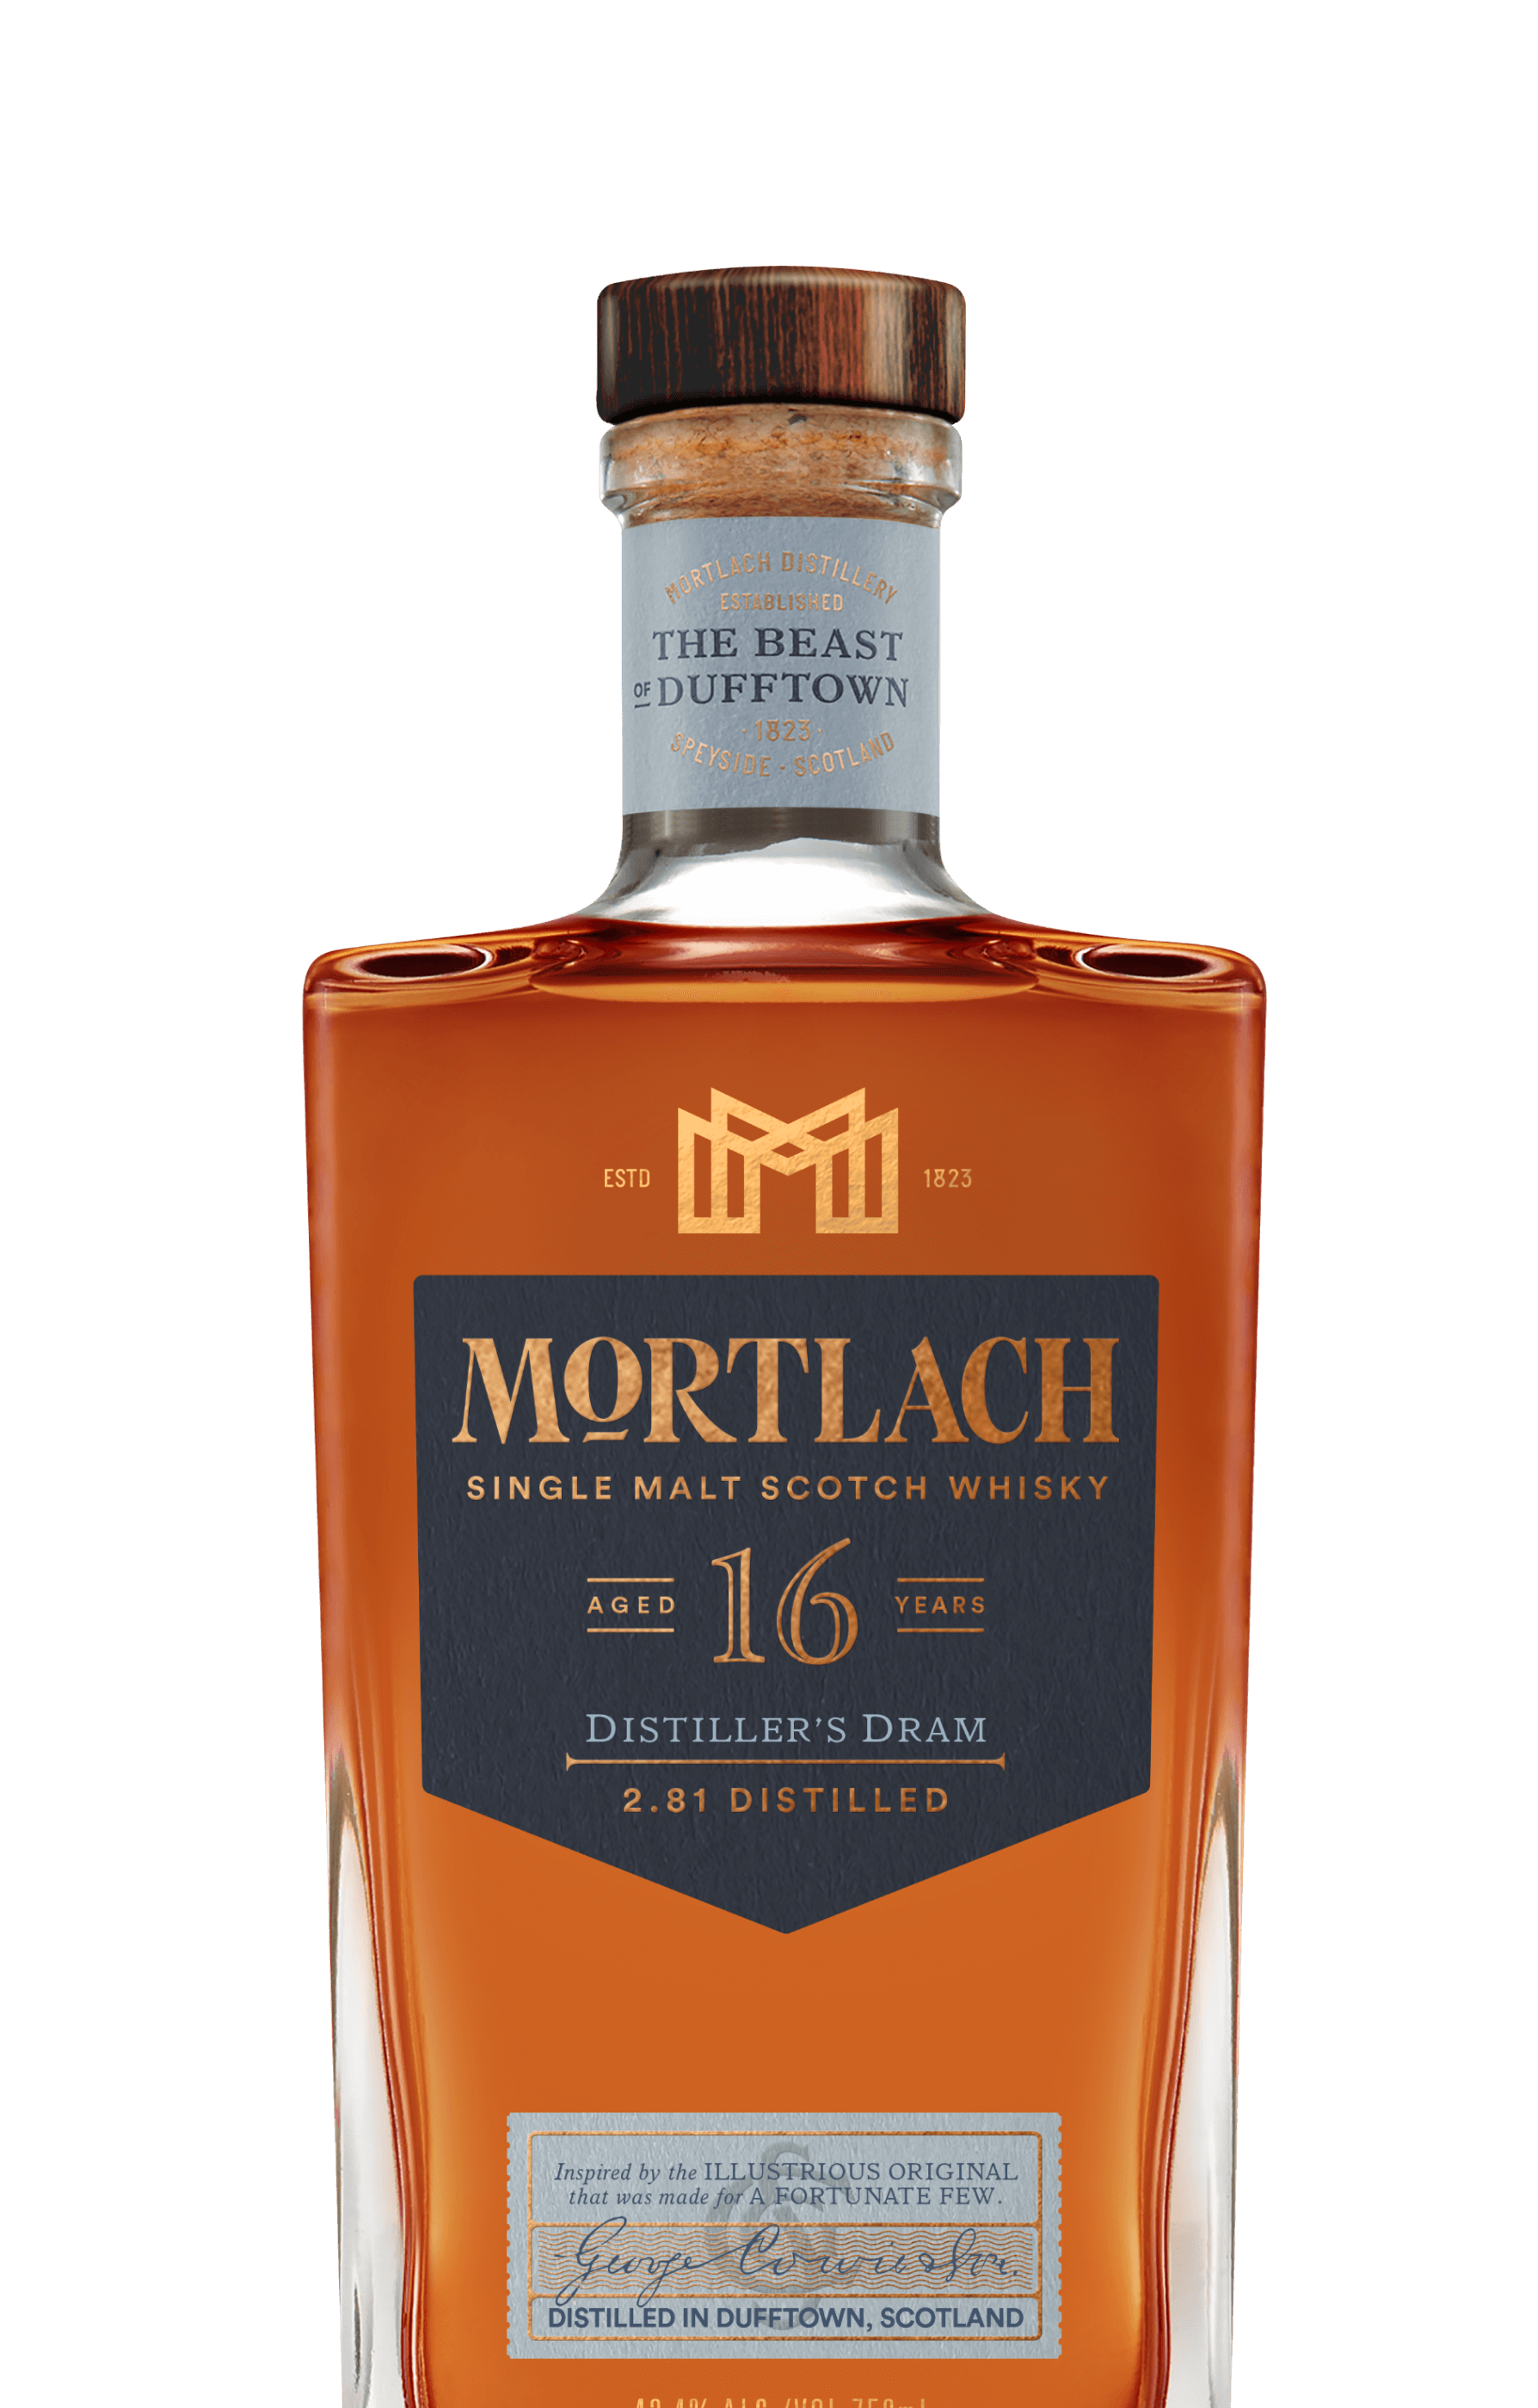 Mortlach 16 Year Old Scotch Whisky